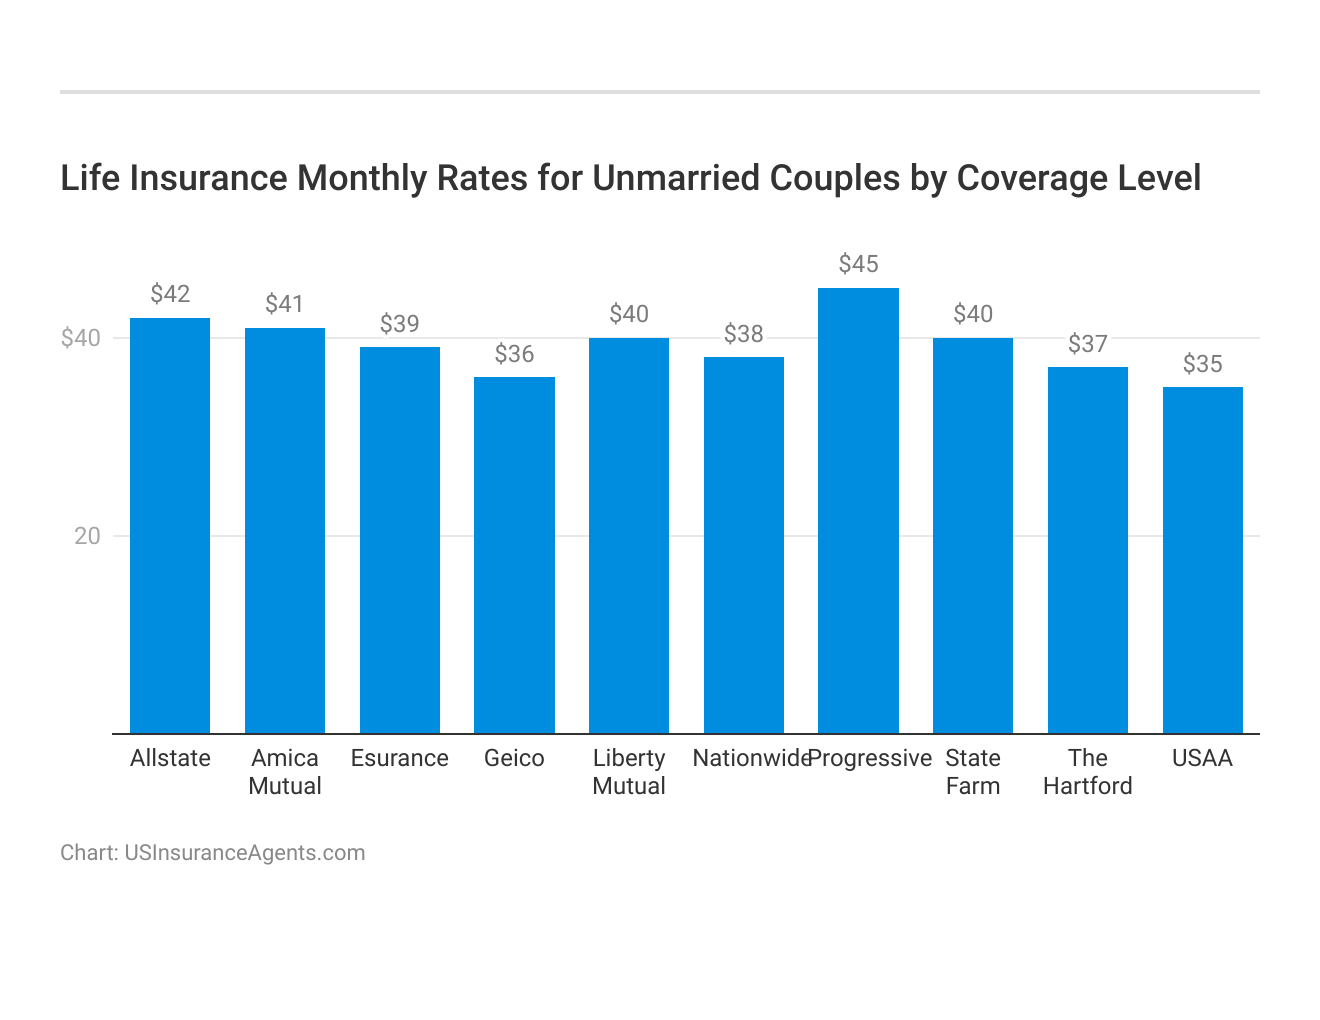 <h3>Life Insurance Monthly Rates for Unmarried Couples by Coverage Level</h3>